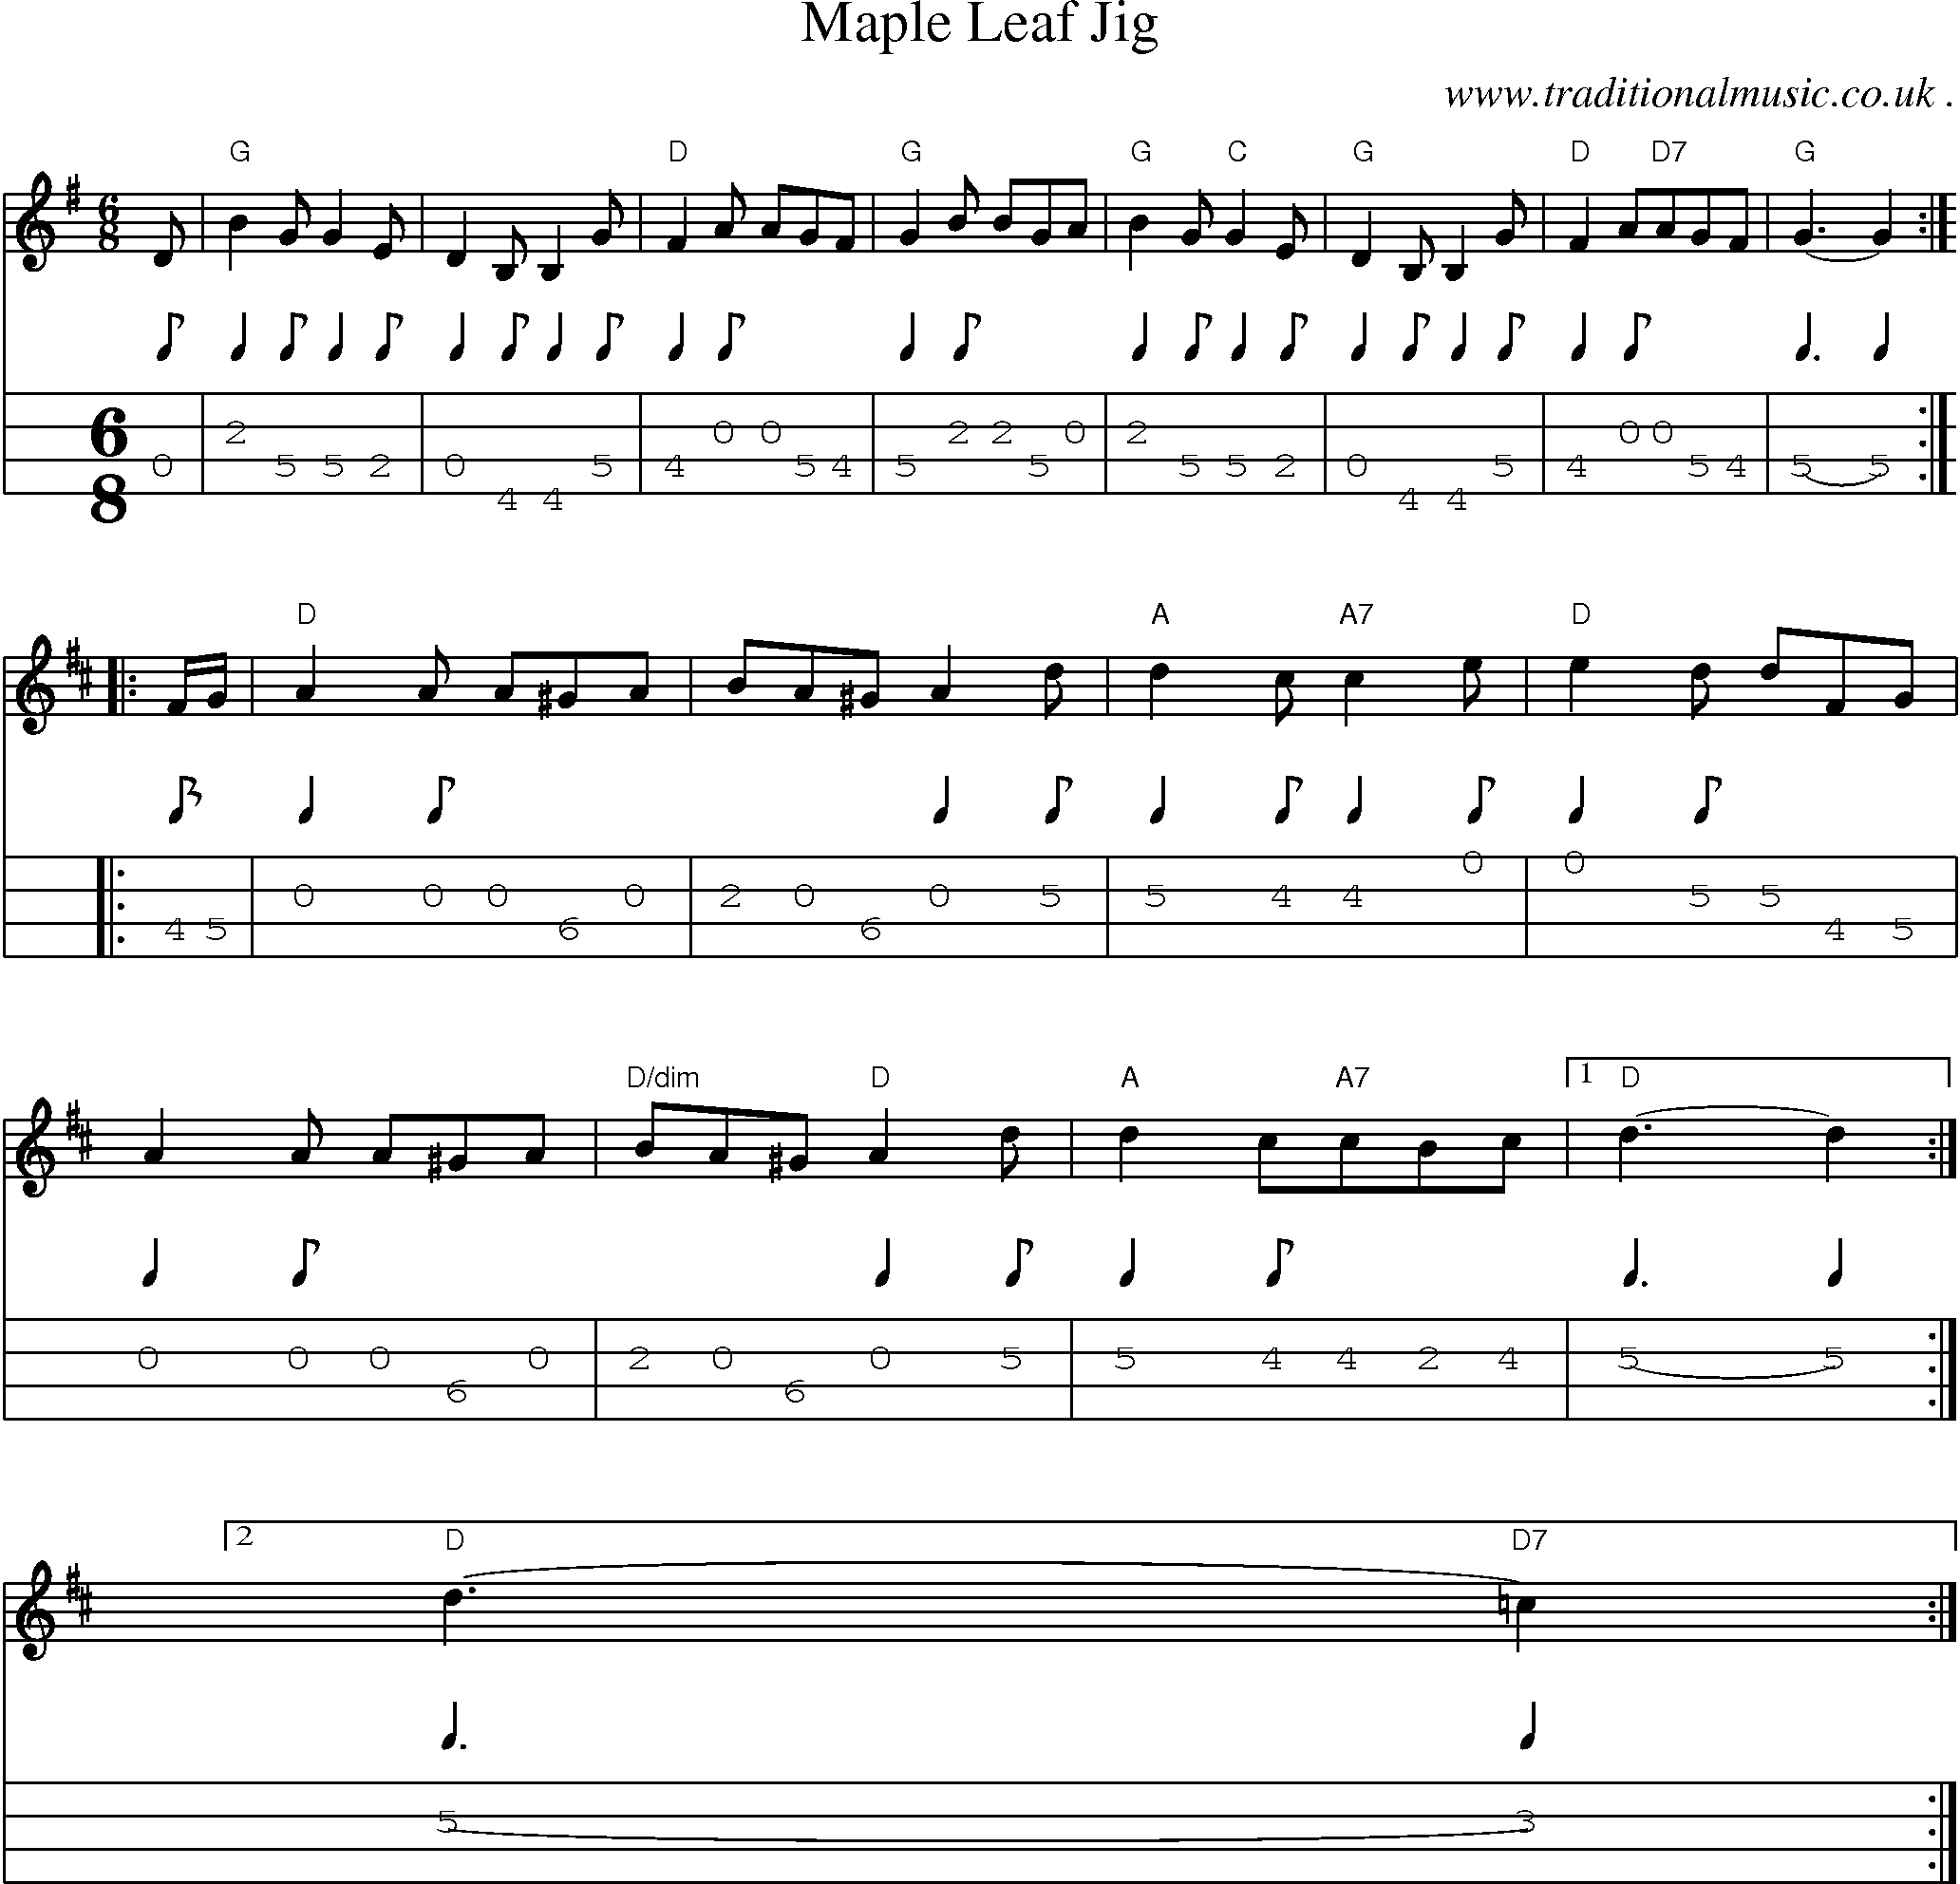 Sheet-Music and Mandolin Tabs for Maple Leaf Jig